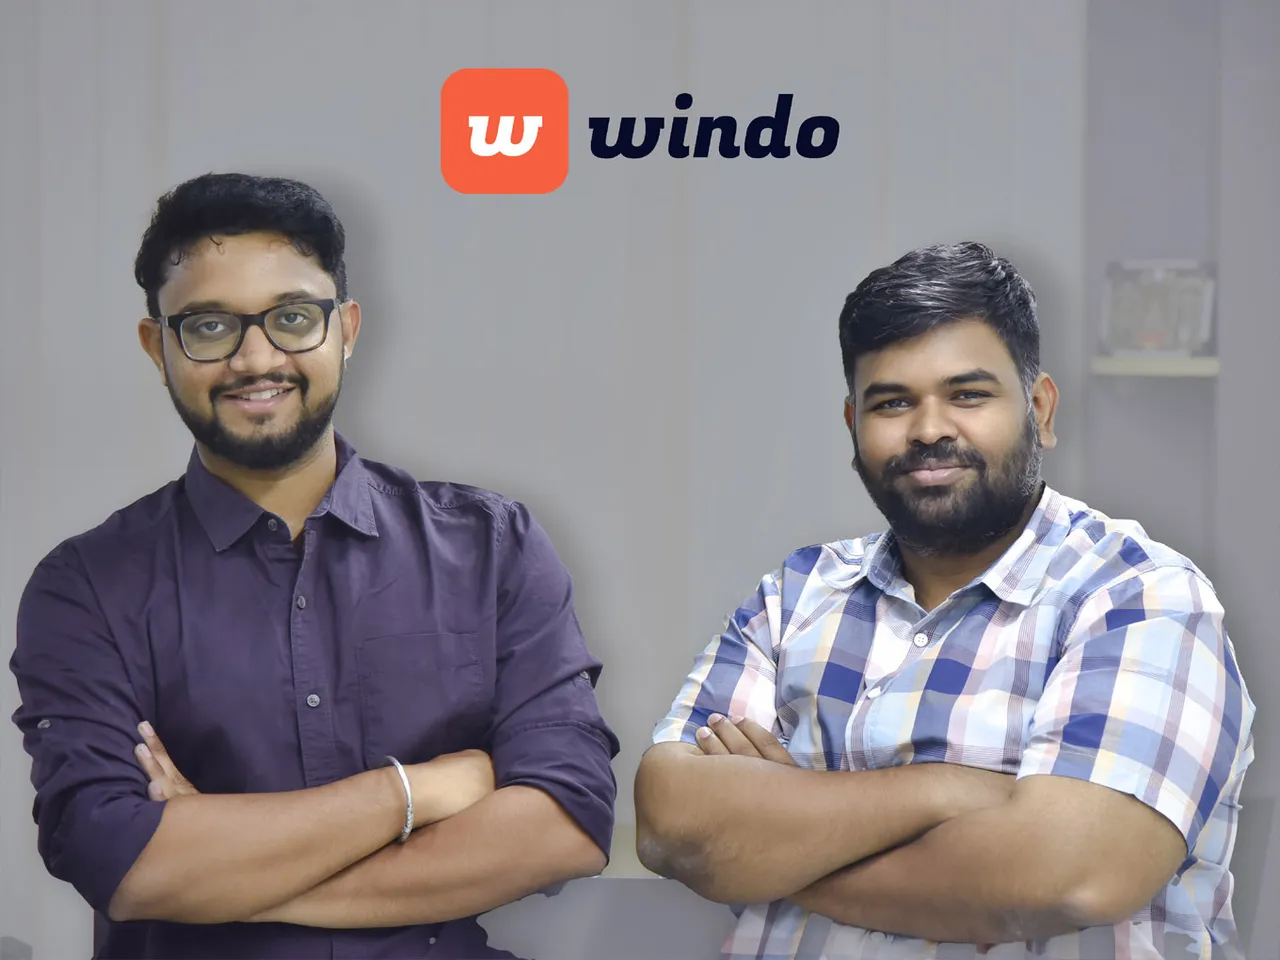 Social commerce startup Windo raises $1.5M in a pre-Series A round